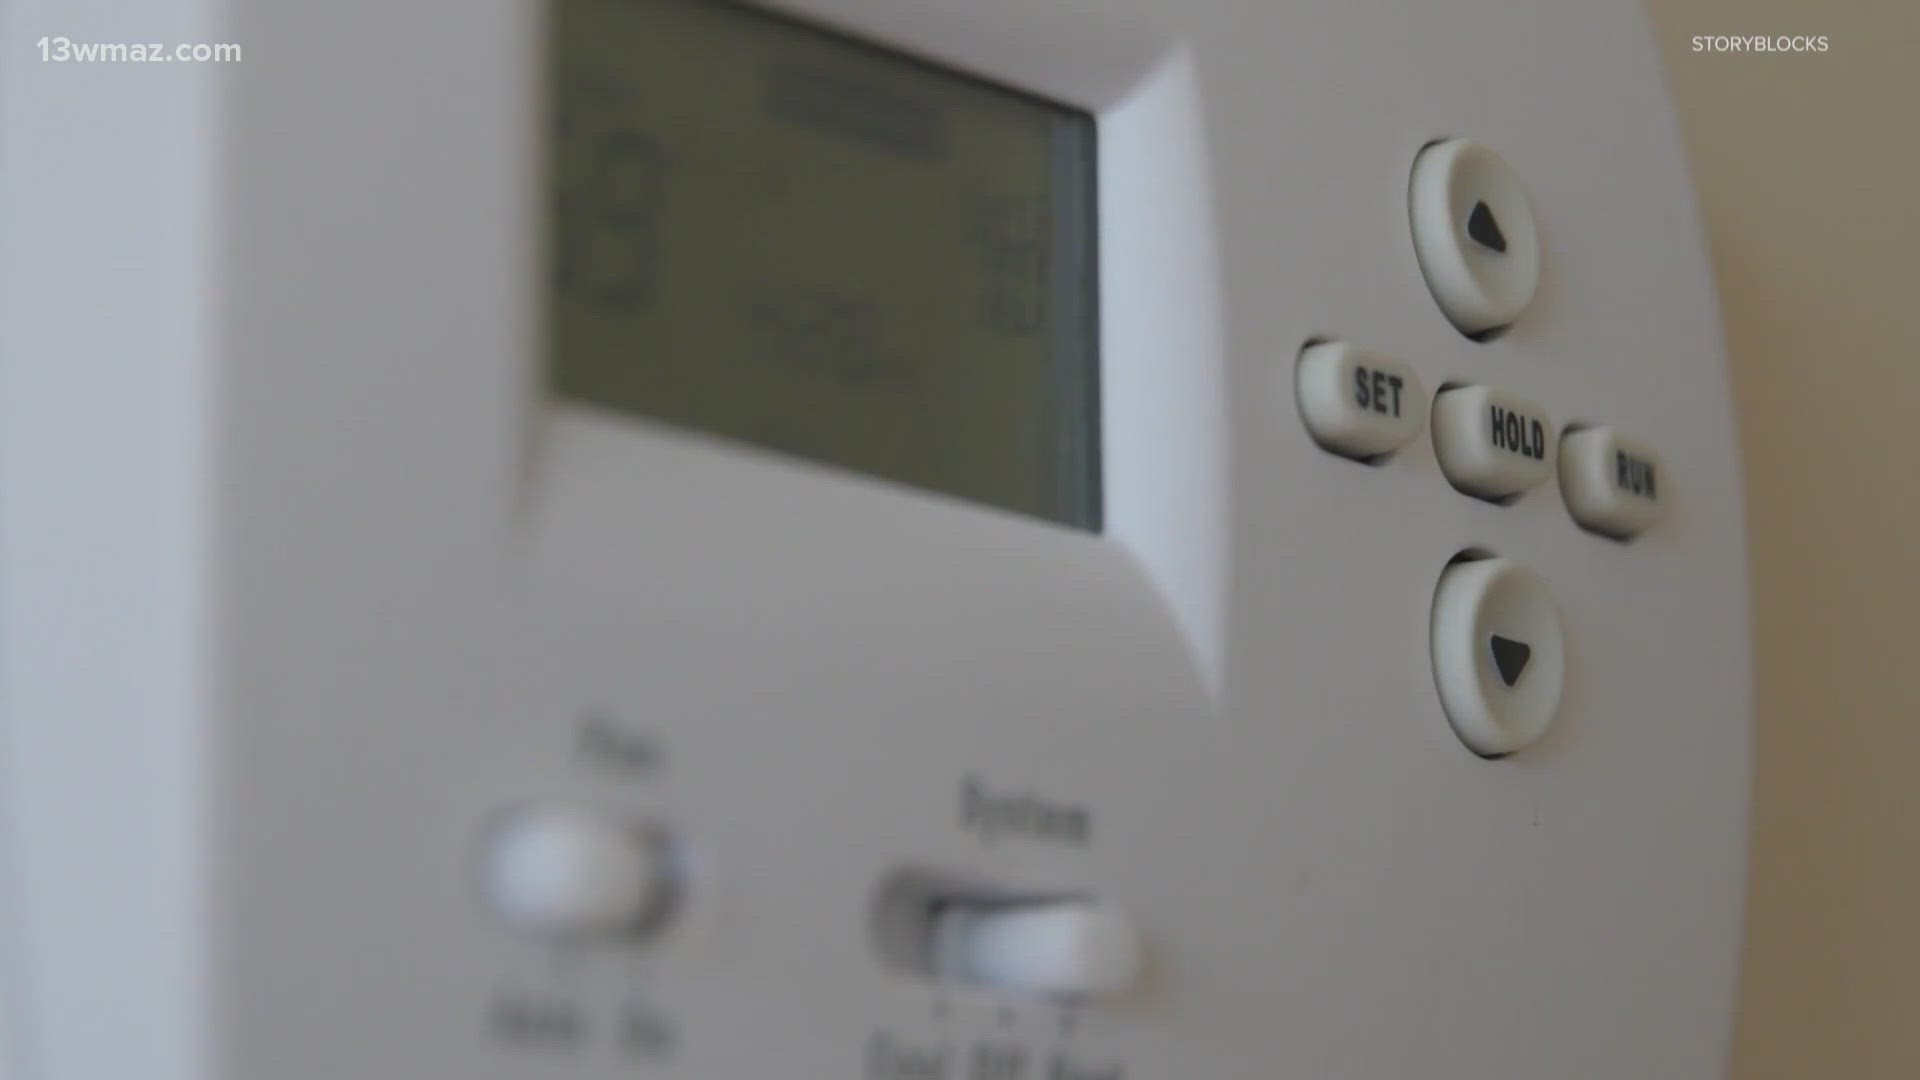 They recommend keeping your thermostat at 78 degrees and not doing laundry between 2:00 p.m. - 7:00 p.m.